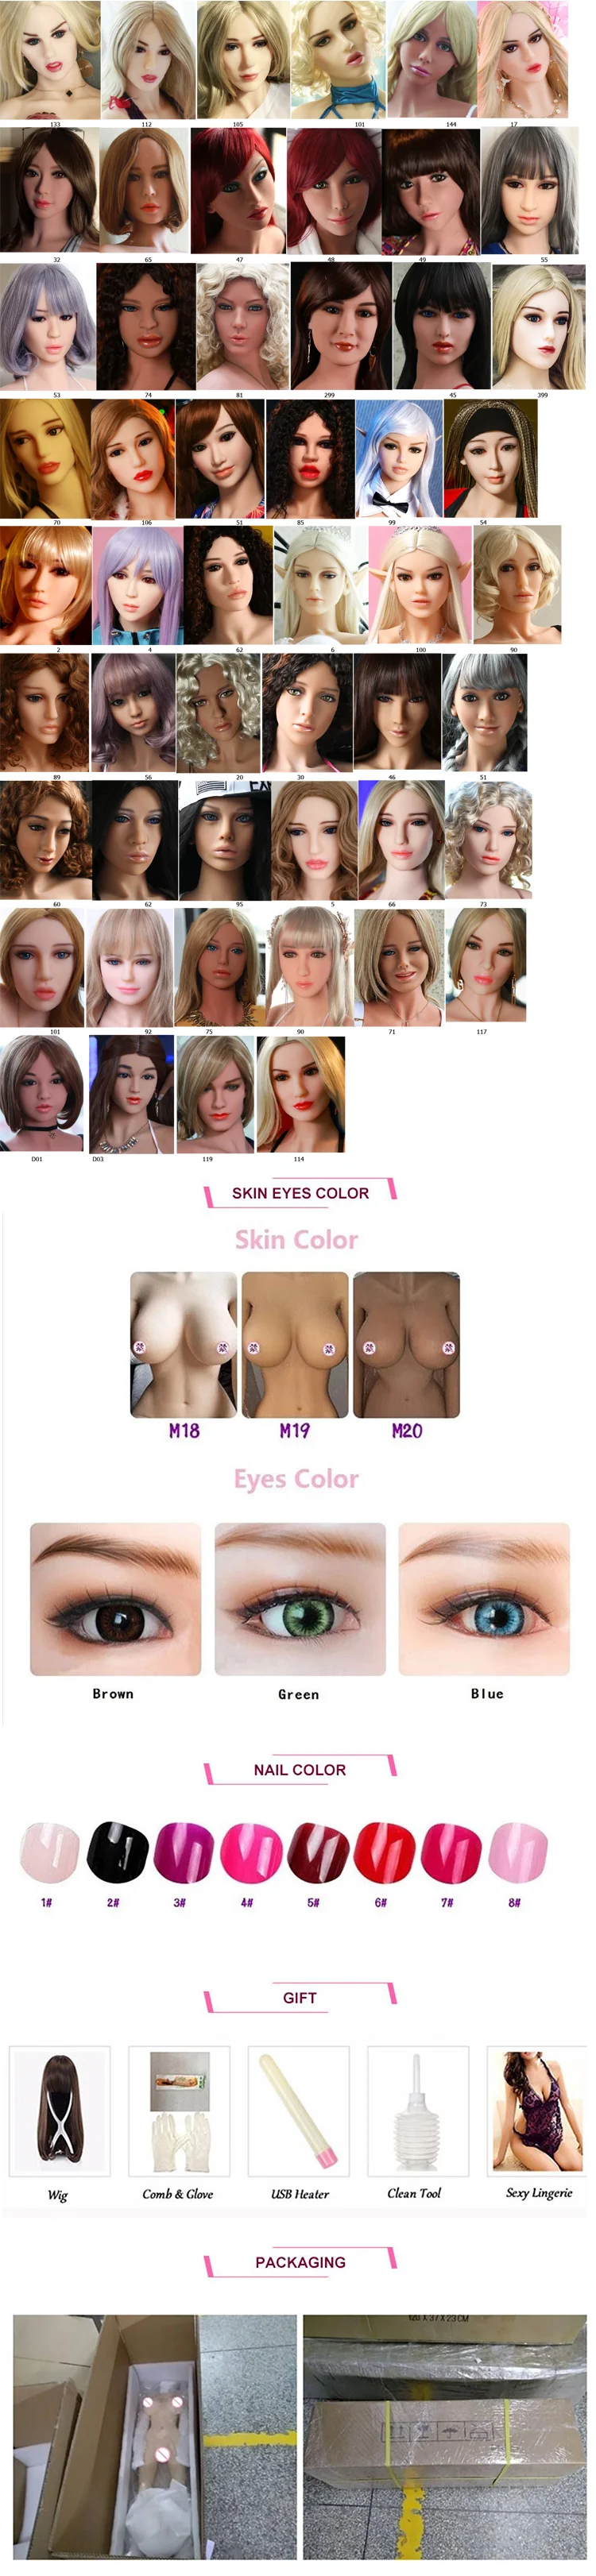 Pure 125cm TPE Optional funtion Beautiful real sex doll for men